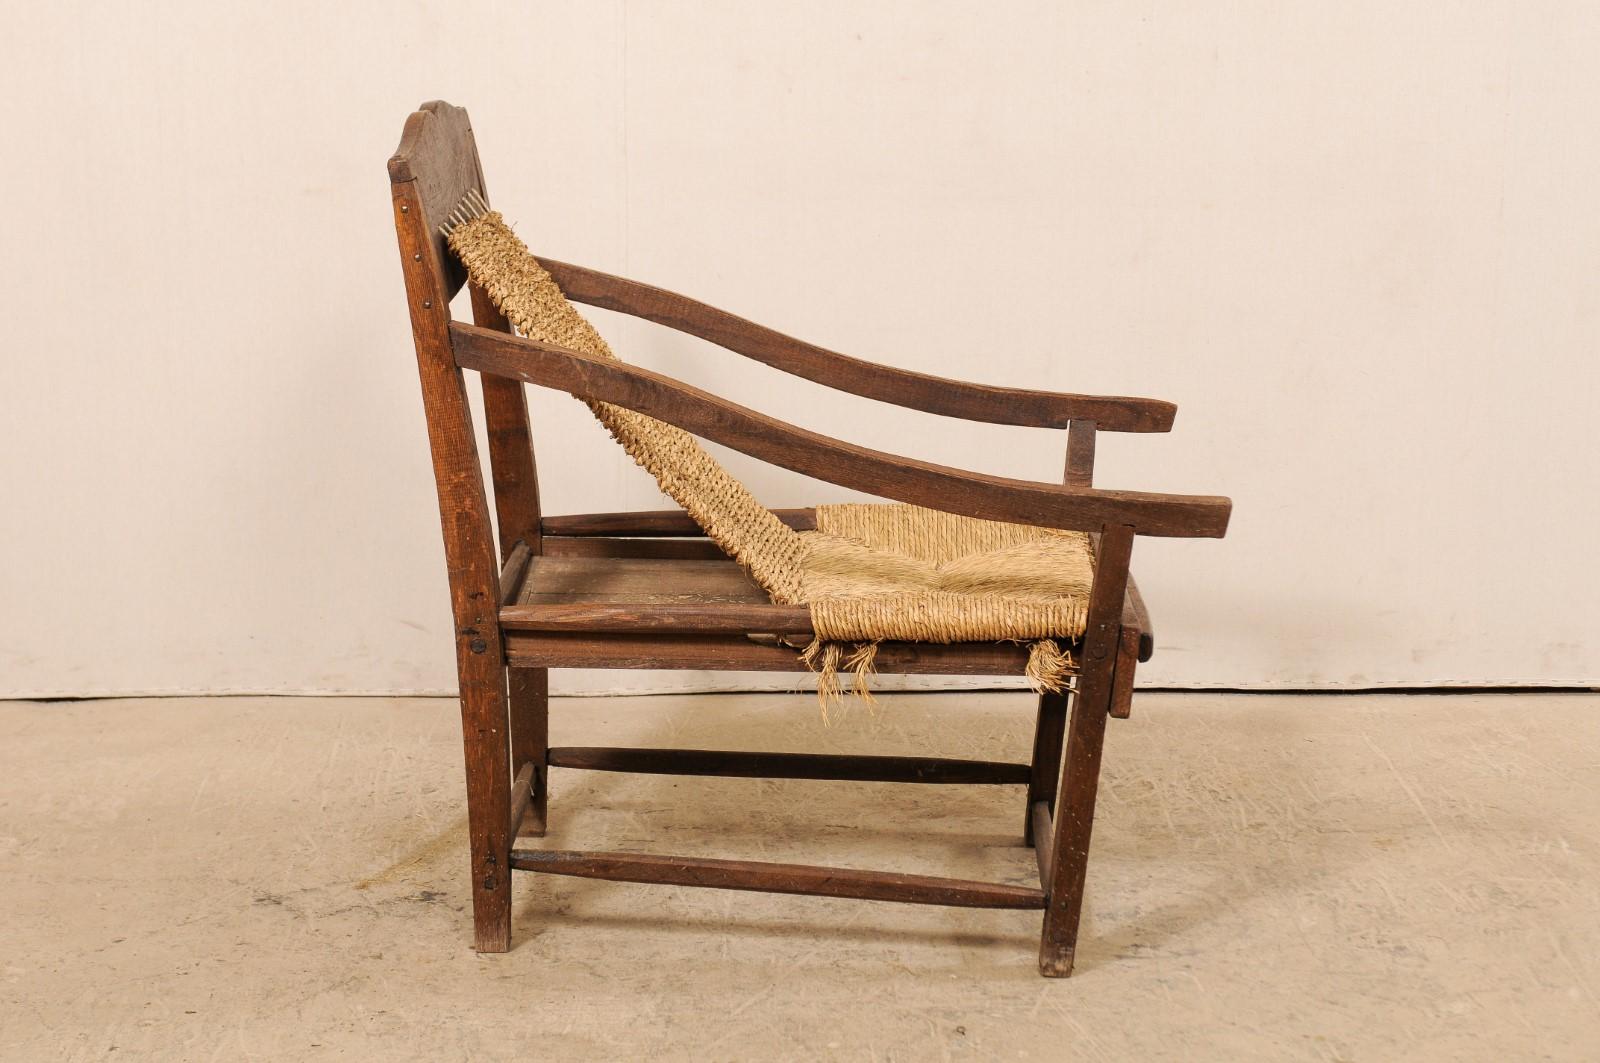 Italian Sling Lounge Chair w/ Rush Seating & Extendable Foot-Rest, Early 20th C. In Good Condition For Sale In Atlanta, GA